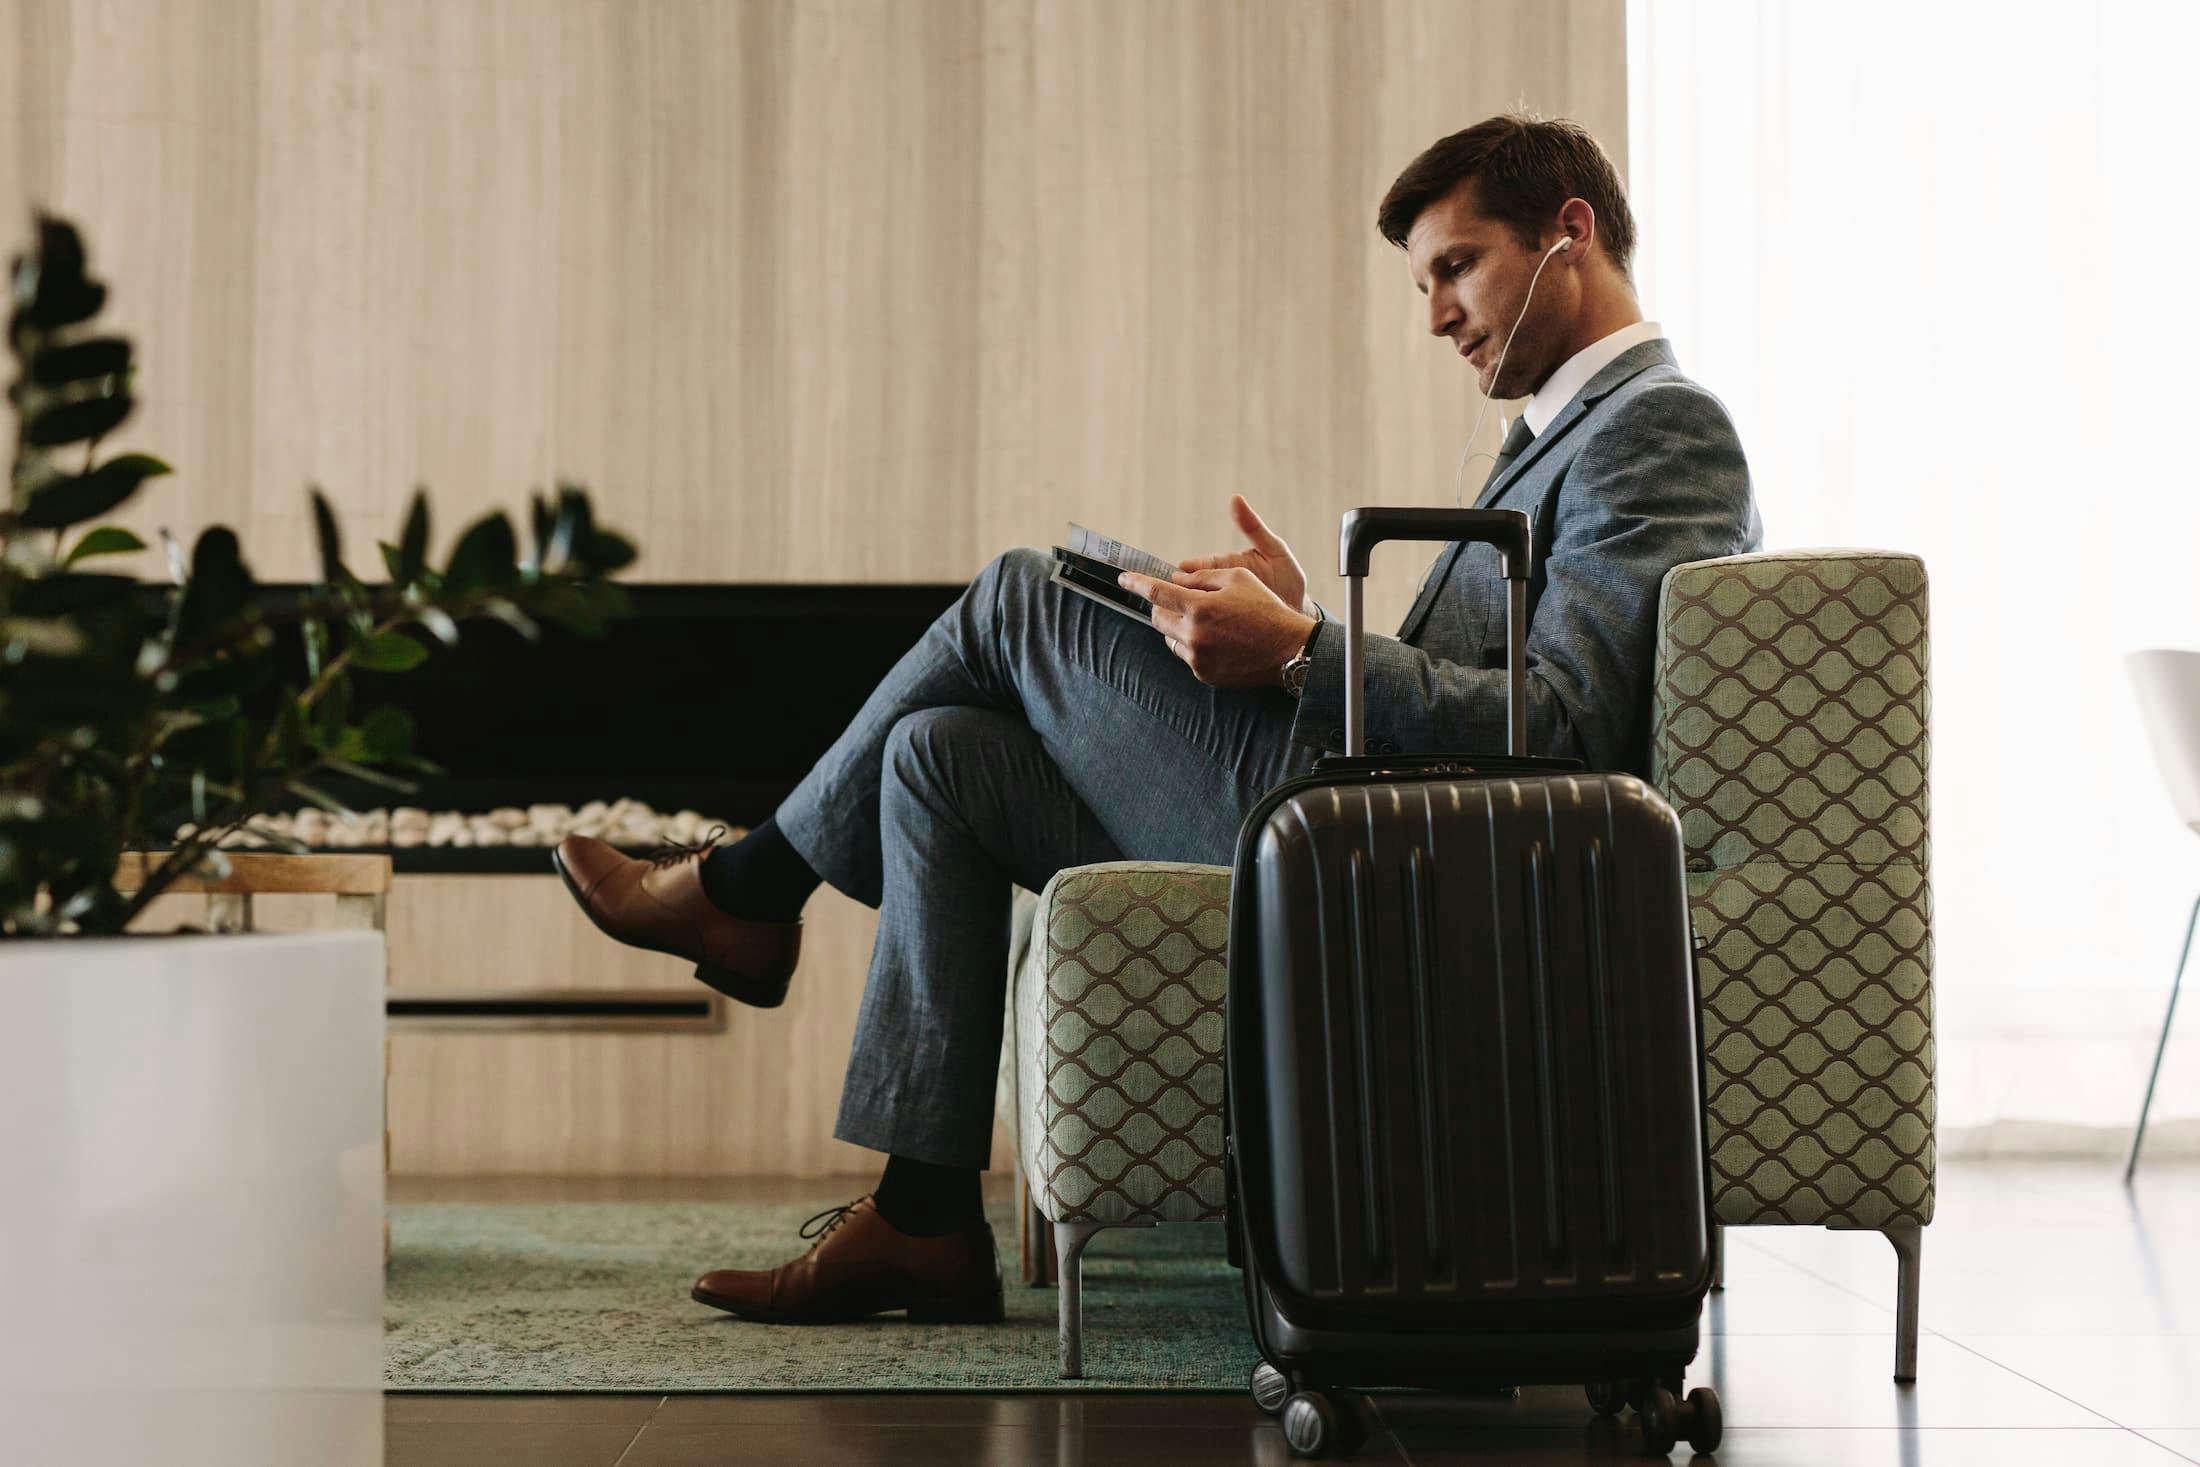 Man in a suit sitting on a chair reading a magazine with a suitcase beside him.